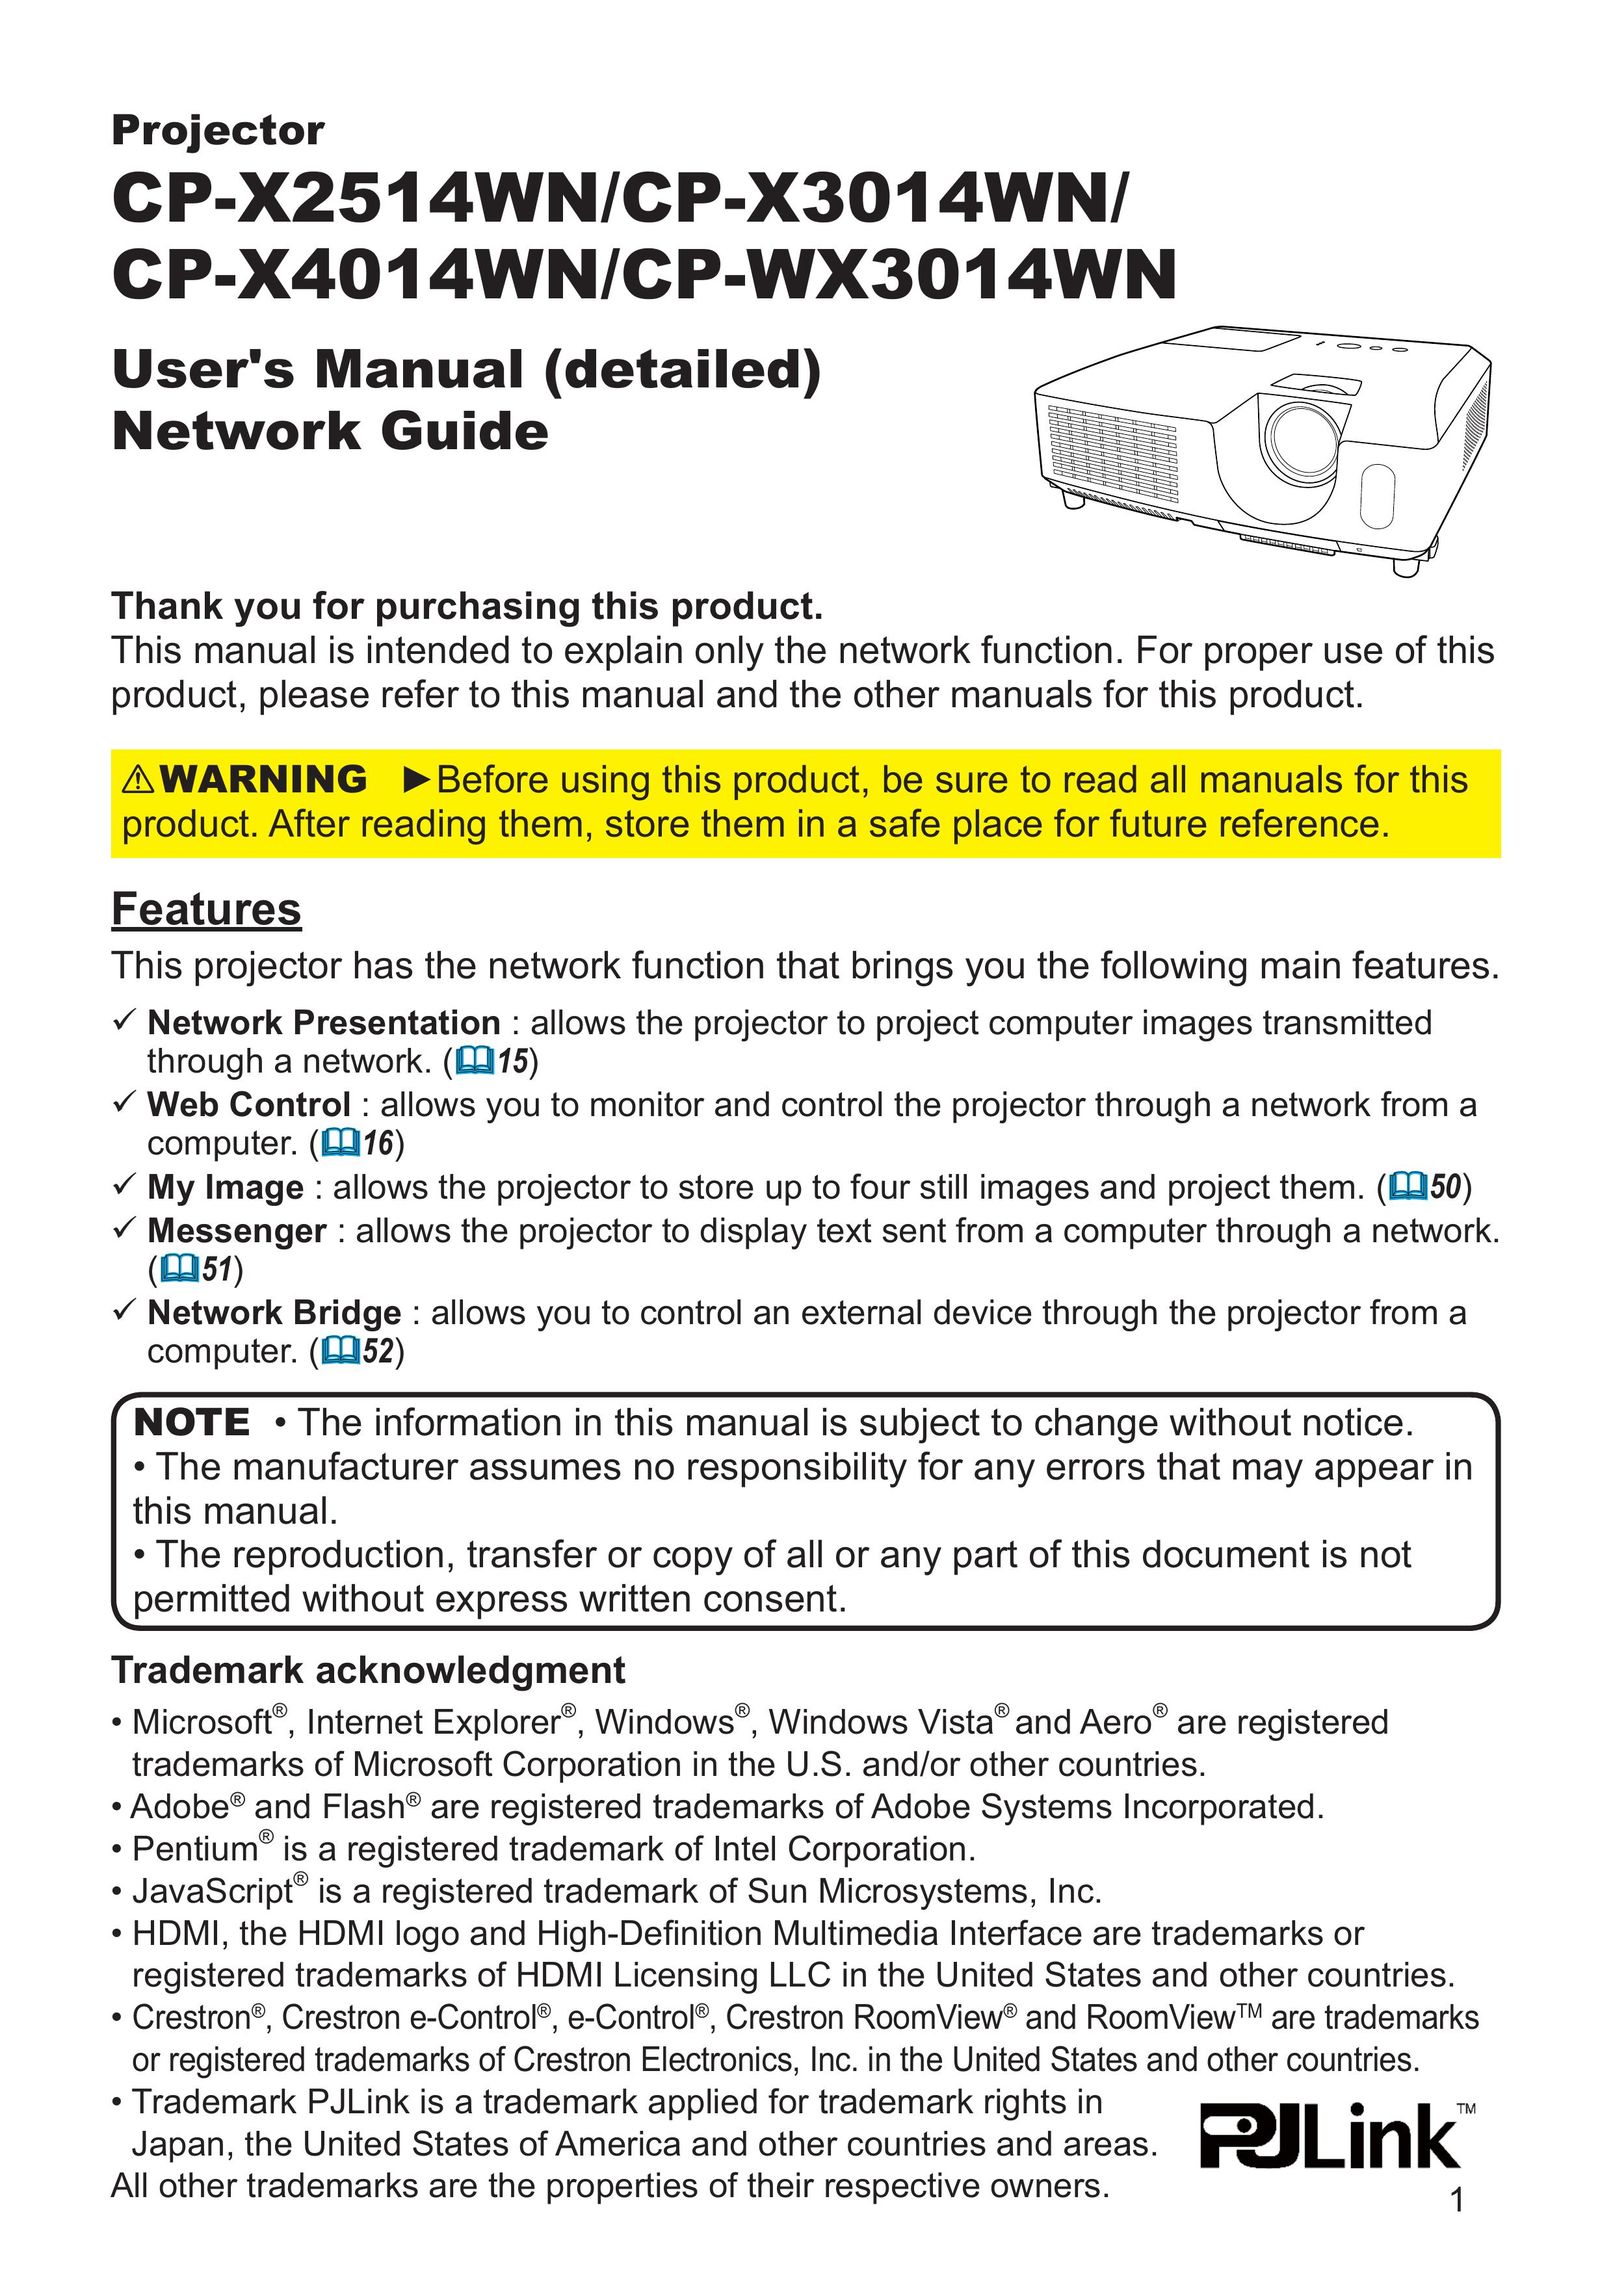 Crestron electronic CP-WX3014WN Projector User Manual